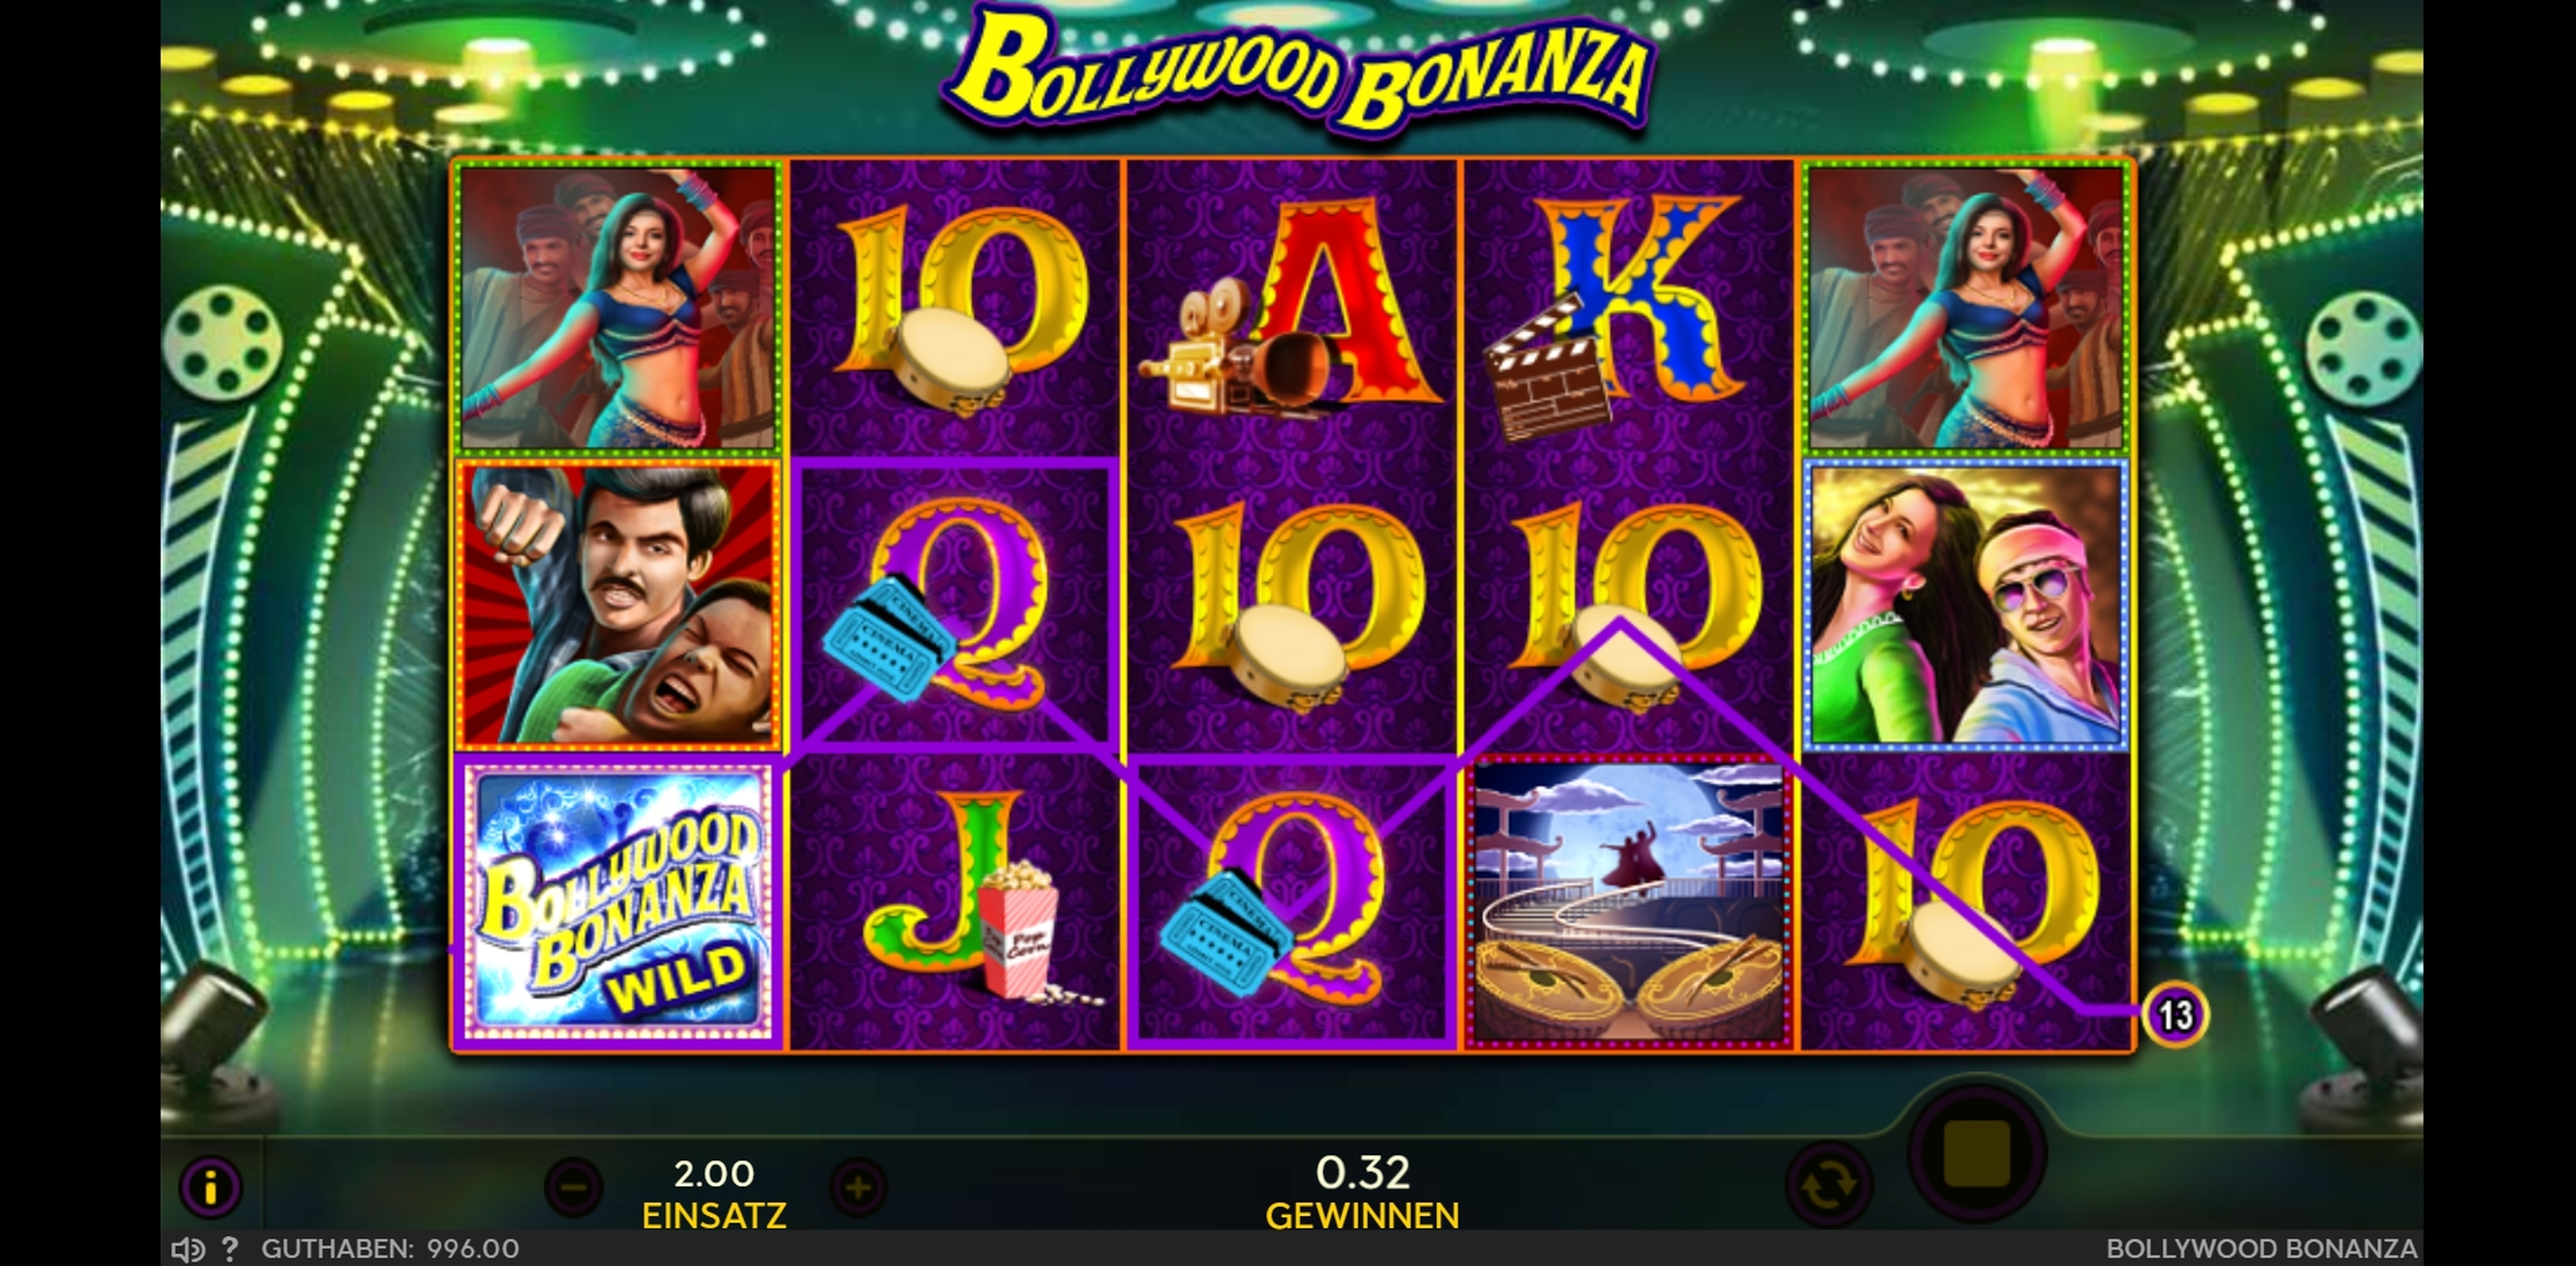 Win Money in Bollywood Bonanza Free Slot Game by 888 Gaming